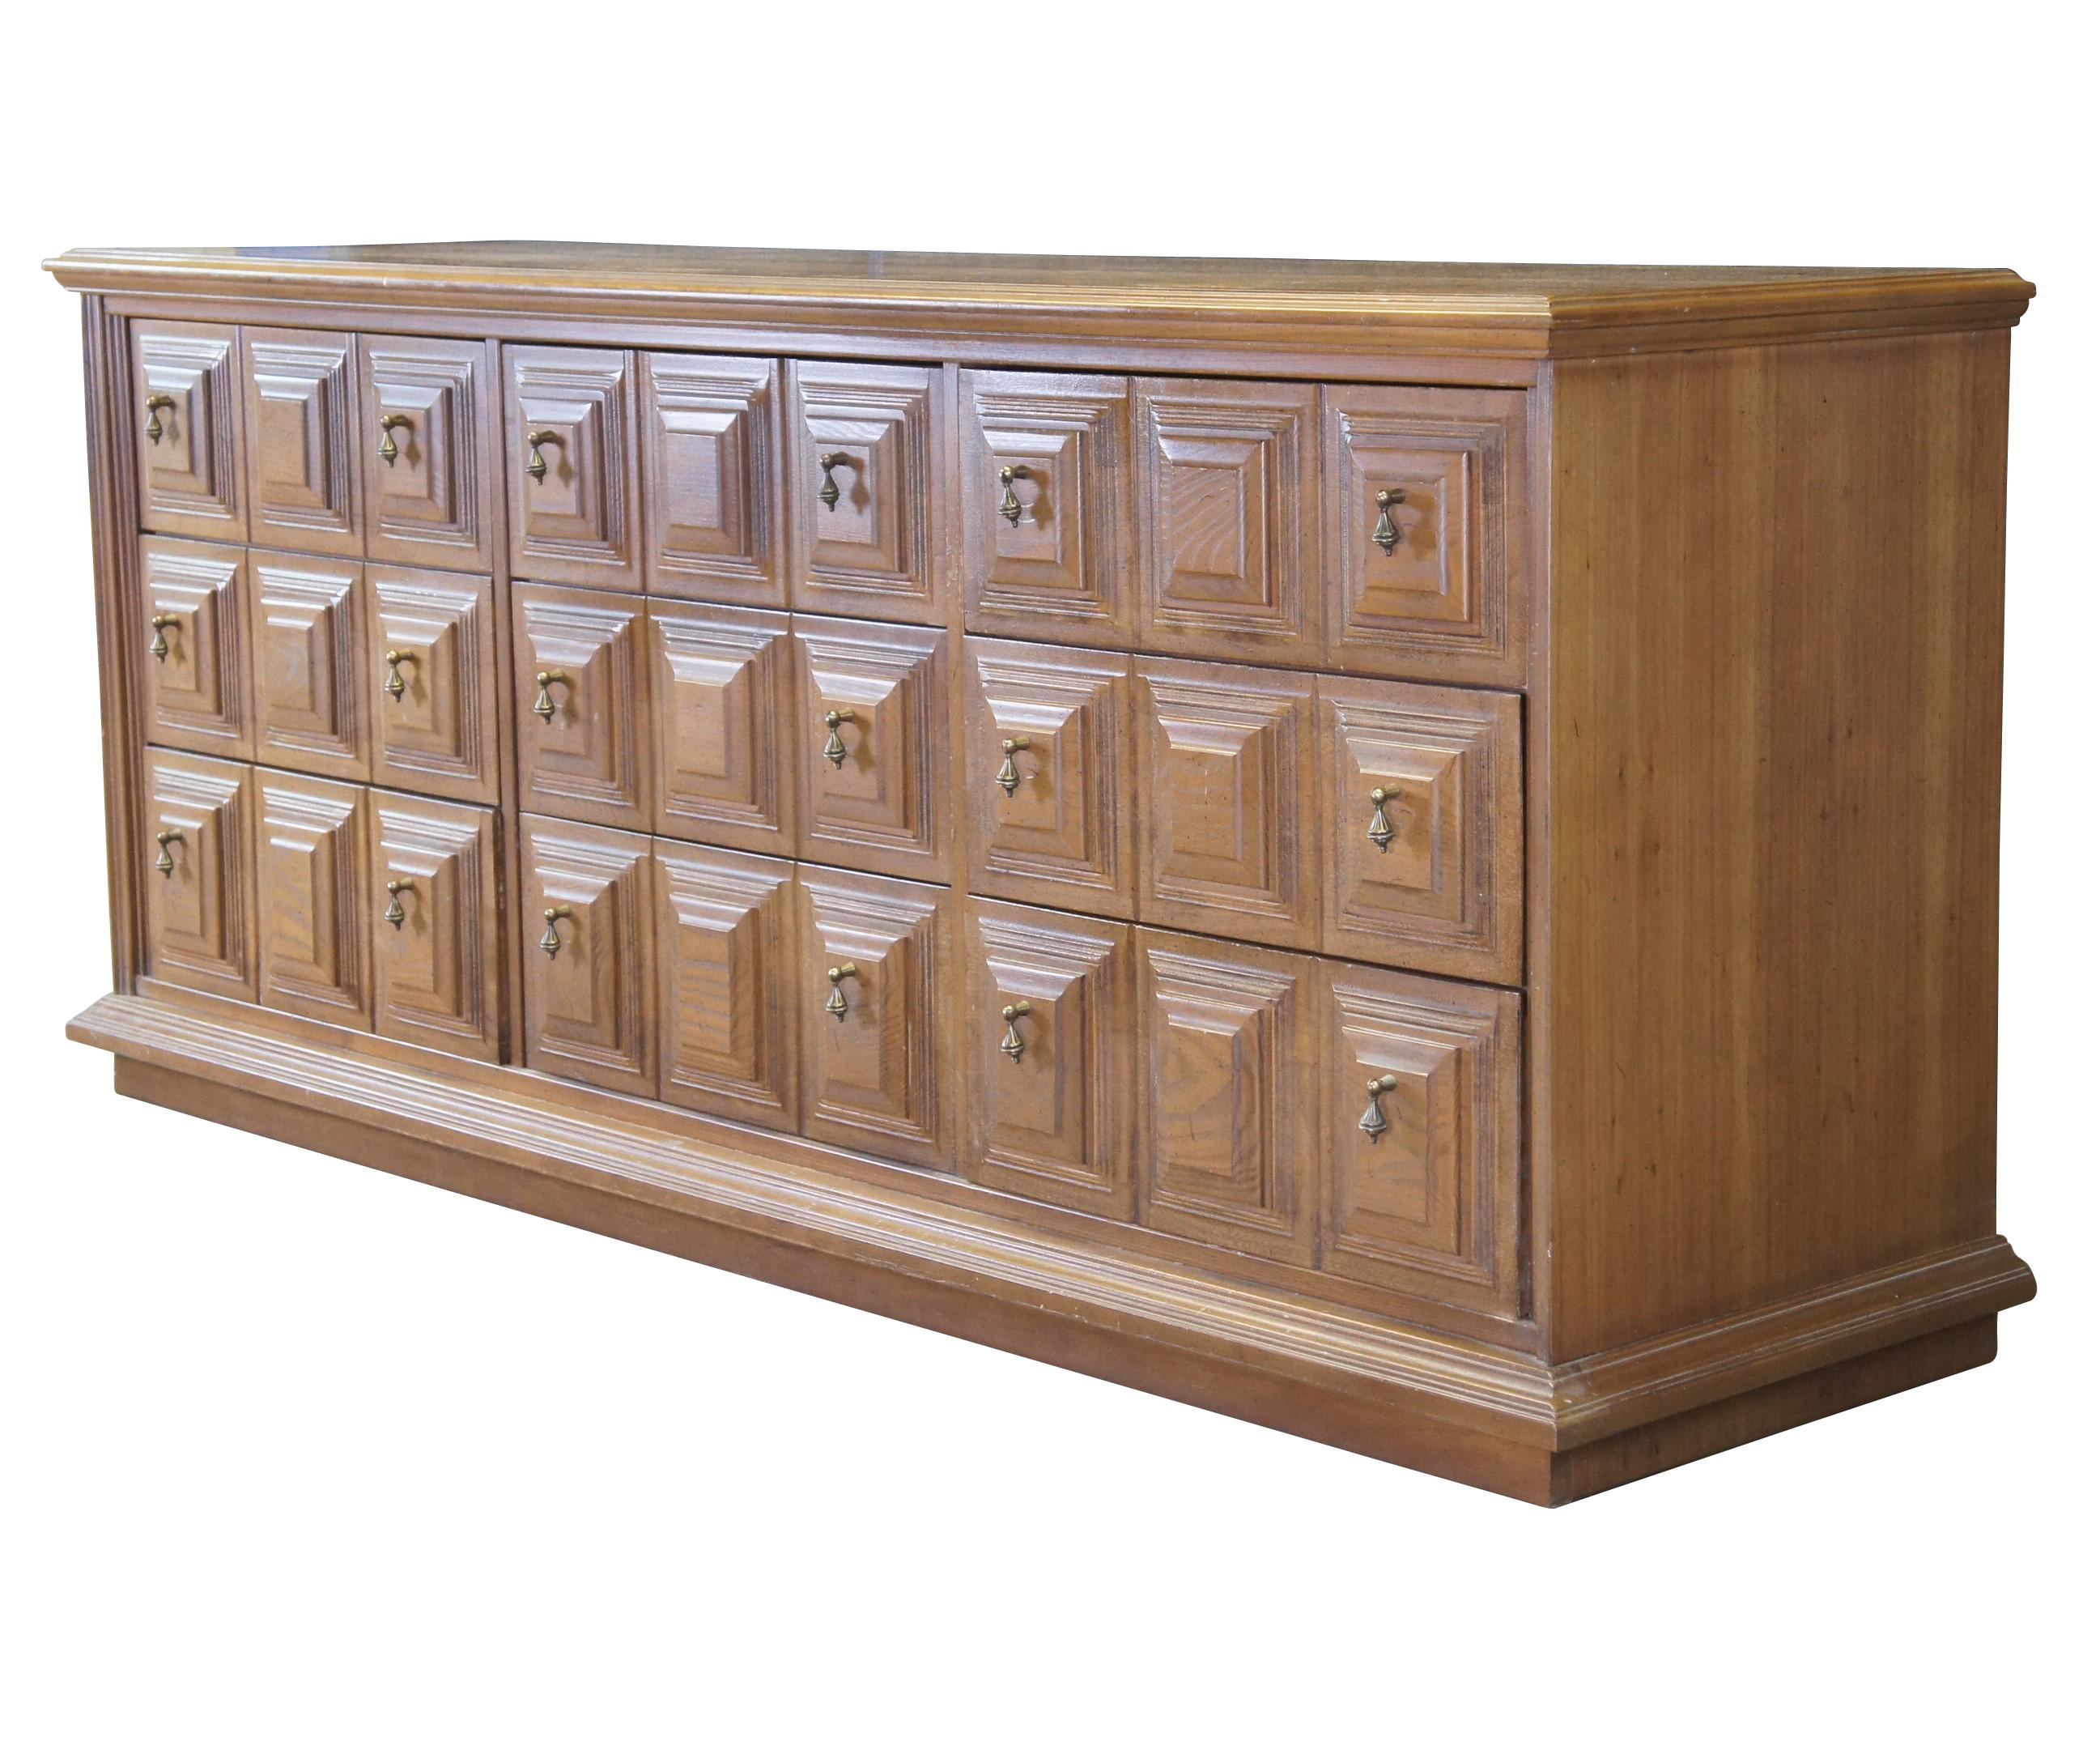 Stanley Furniture mid century paneled oak nine drawer dresser. Features a blend of Italian Provincial and Brutalist styling. The long rectangular case has nine dovetailed drawers with raised square paneling and brass knocker drawer pulls. Great for